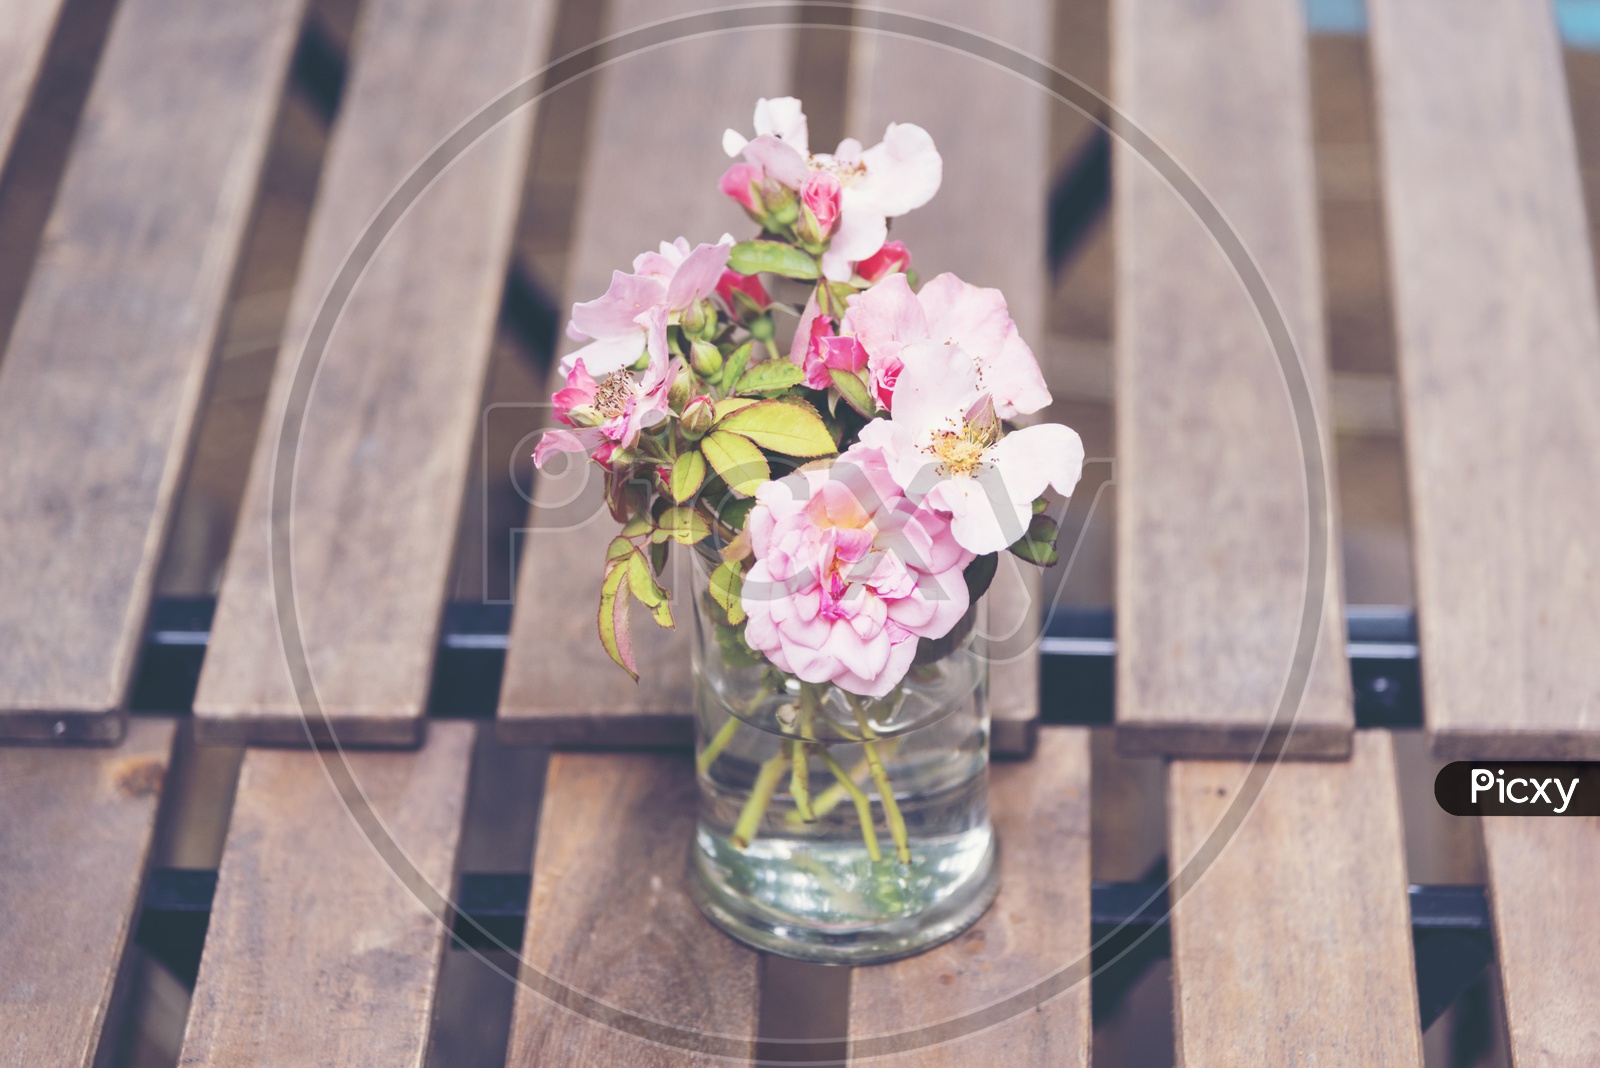 Flower Vase With Beautiful Flowers on a Cafe Table